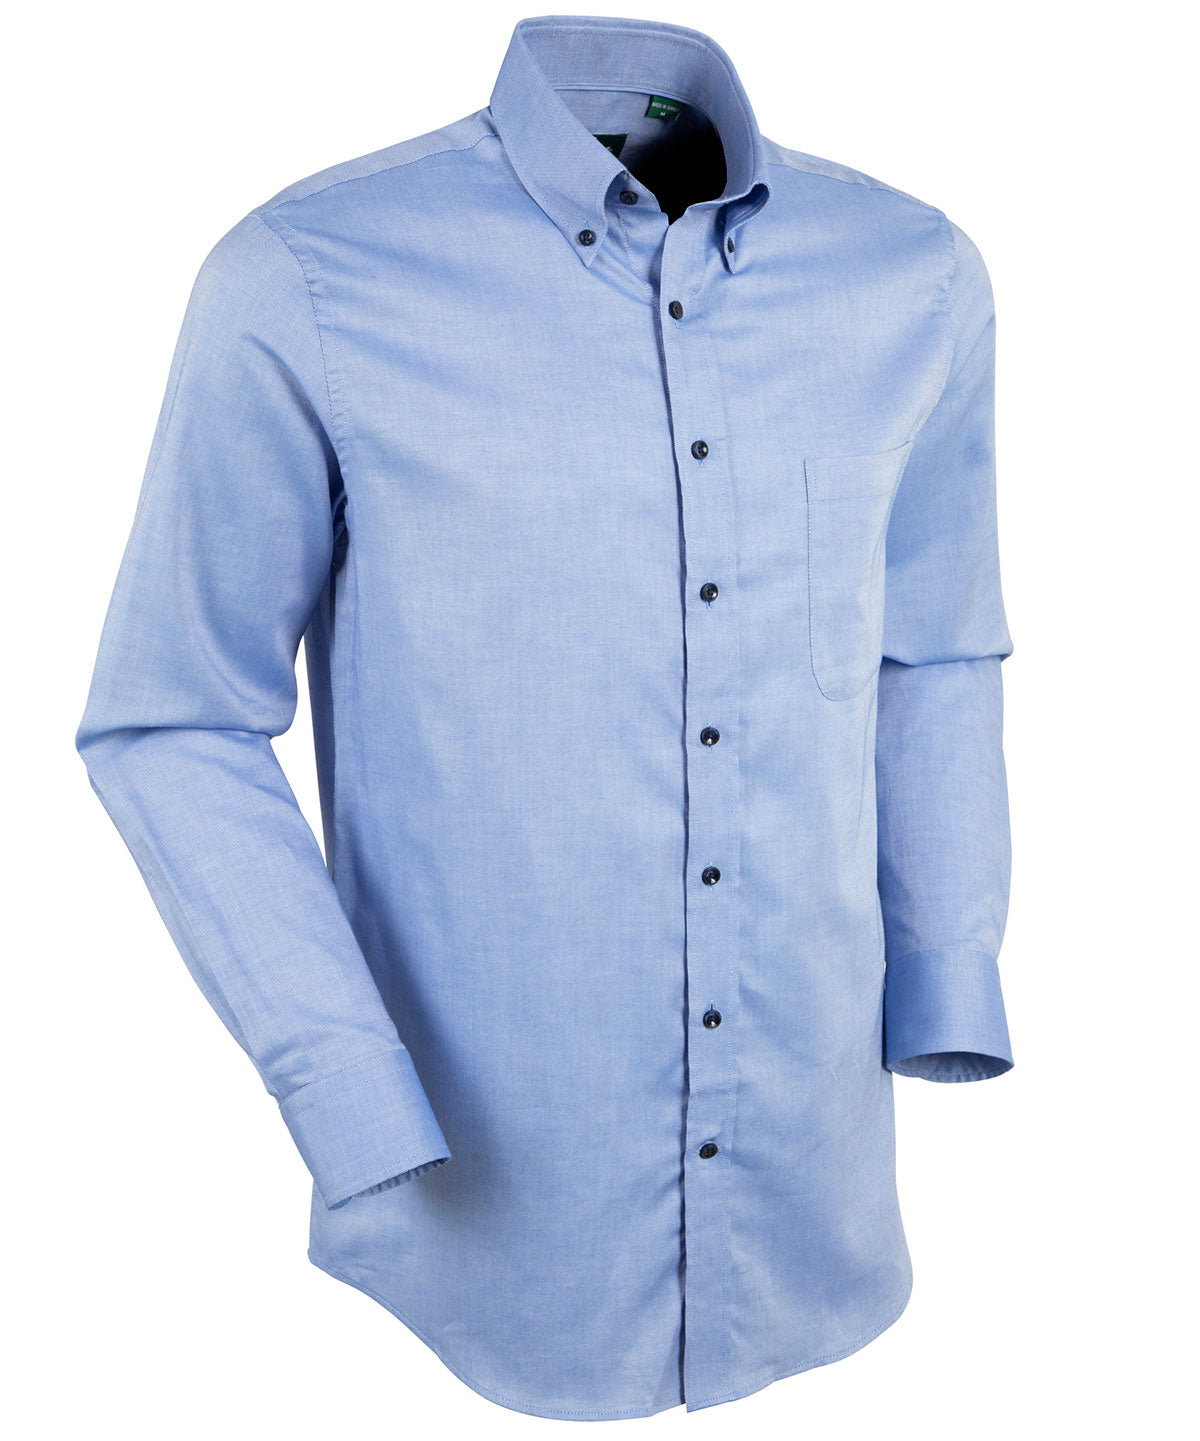 Signature Oxford Long Sleeve Sport Shirt with Contrast Buttons - Trim Fit